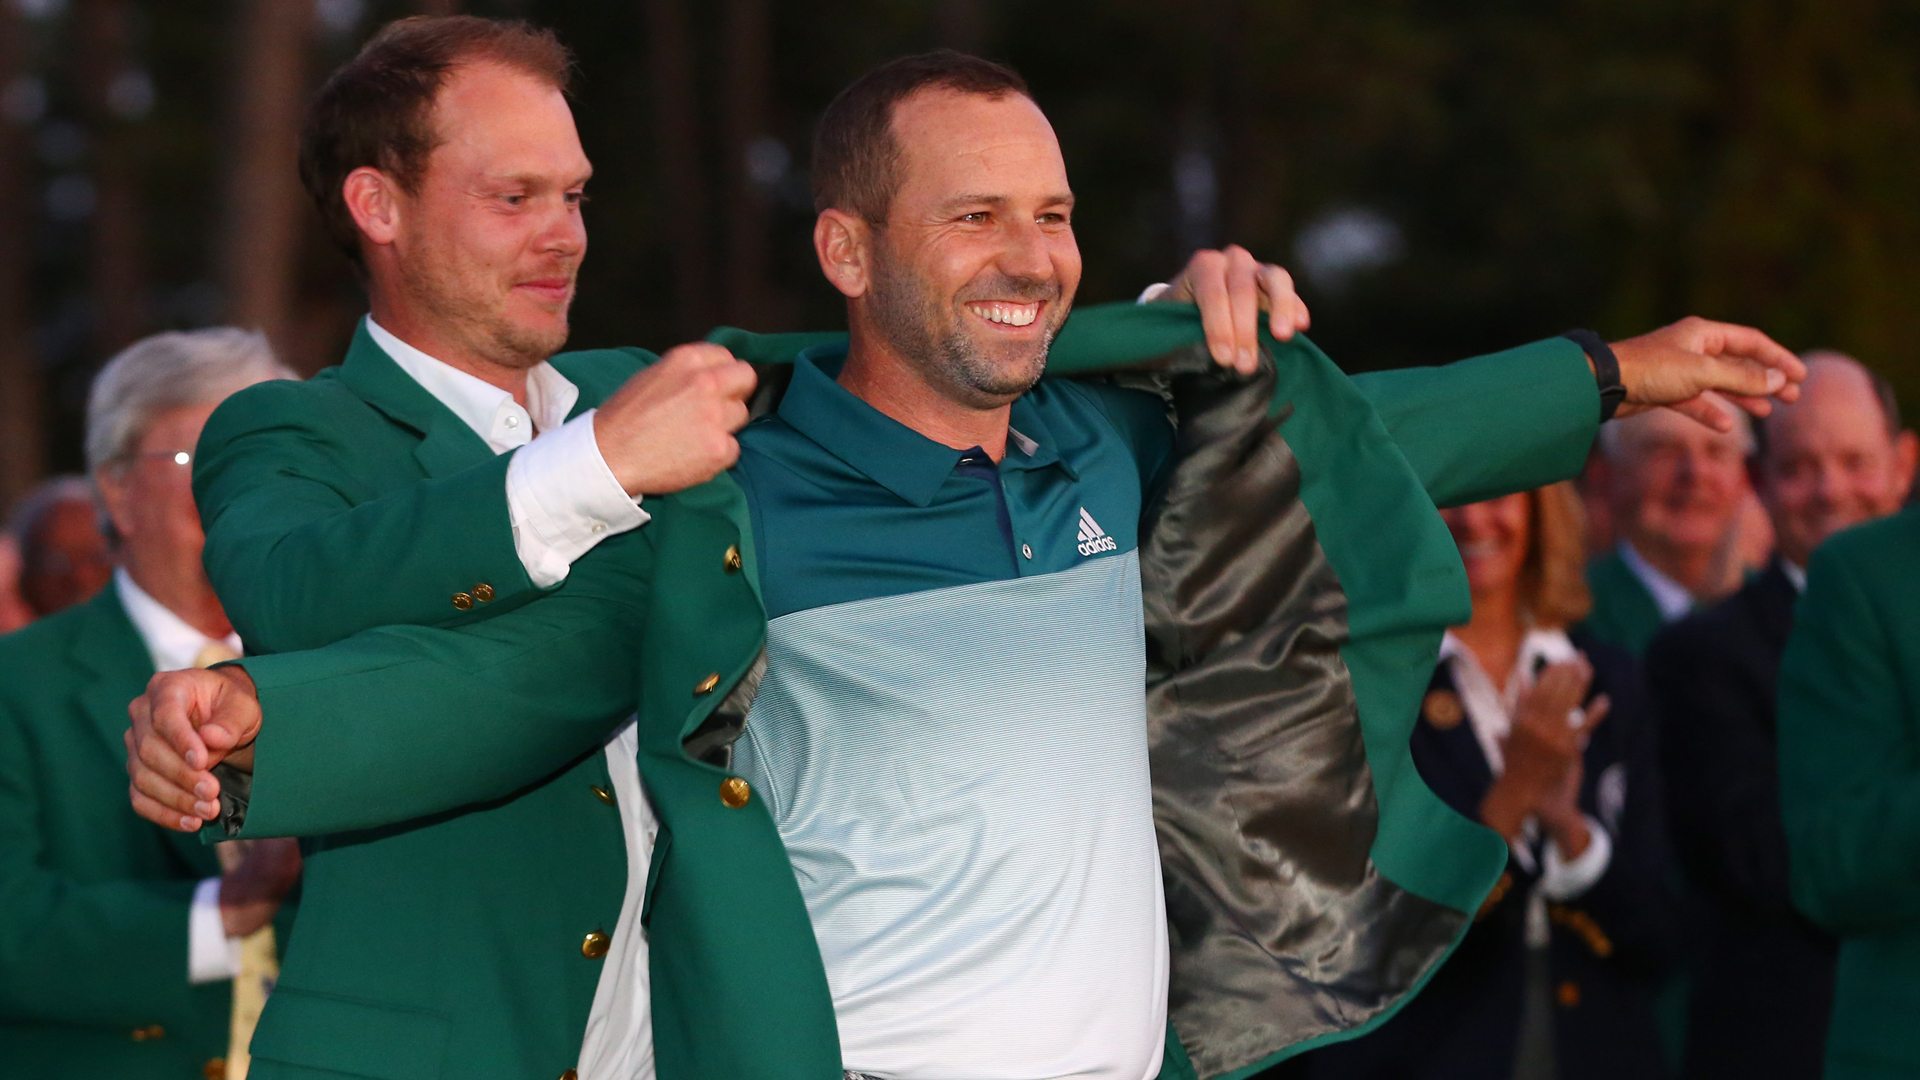 Does early-year success lead to a Masters green jacket?